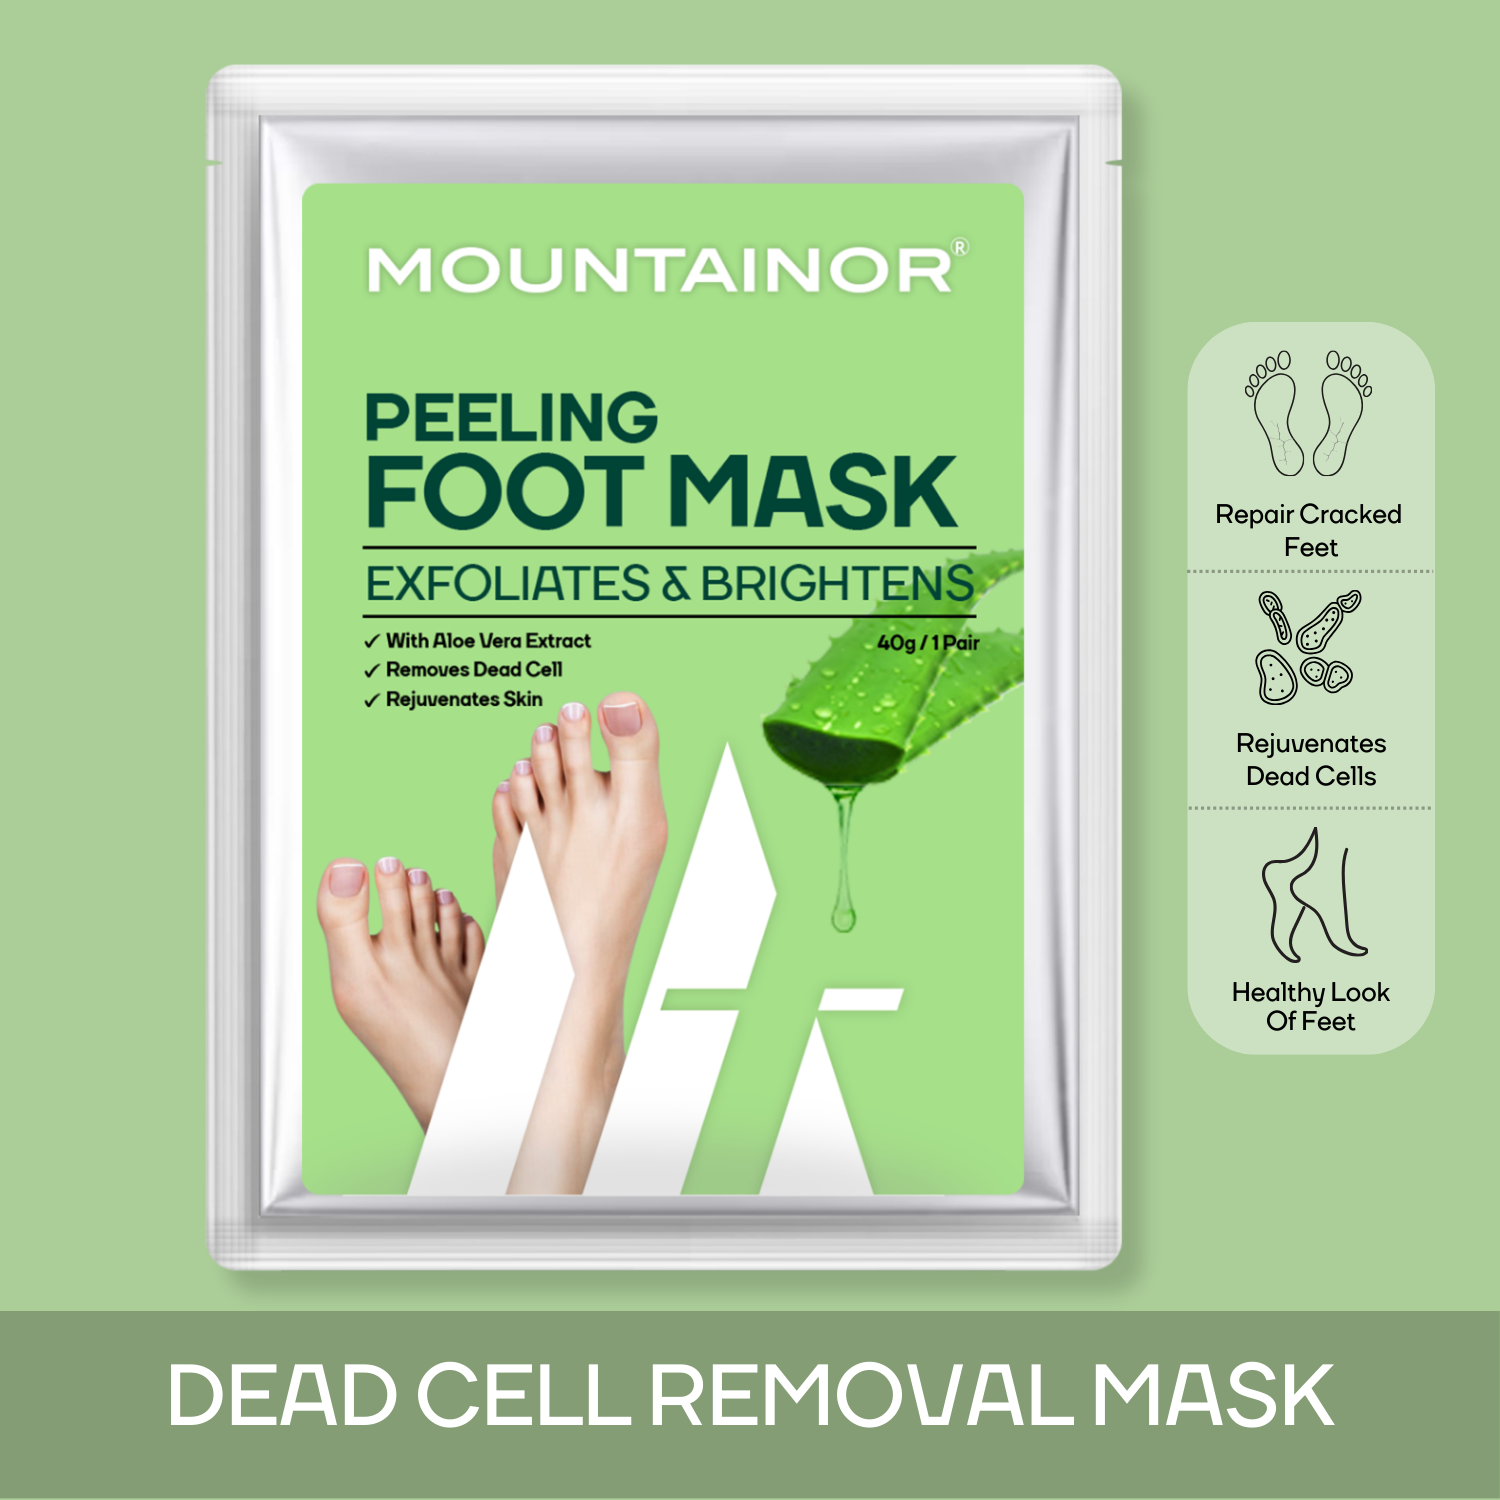 Exfoliate and Reveal Smooth, Soft Feet with Our Nourishing Foot Peeling Mask